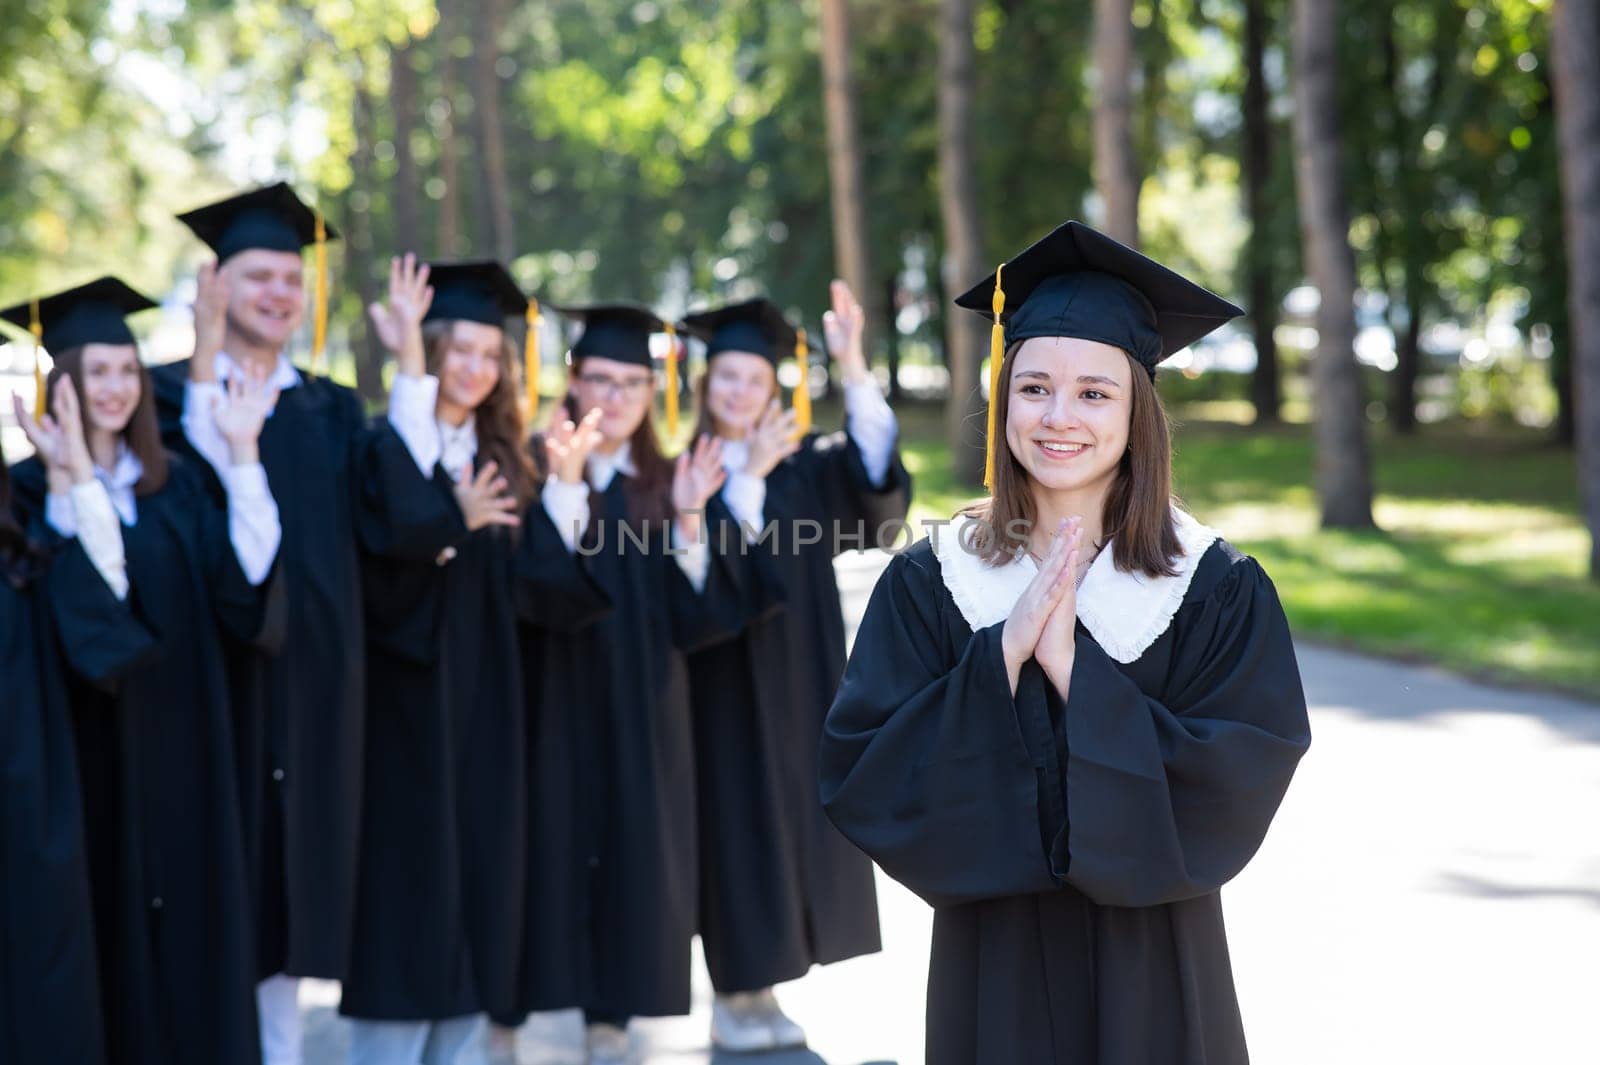 Group of happy students in graduation gowns outdoors. A young girl in the foreground